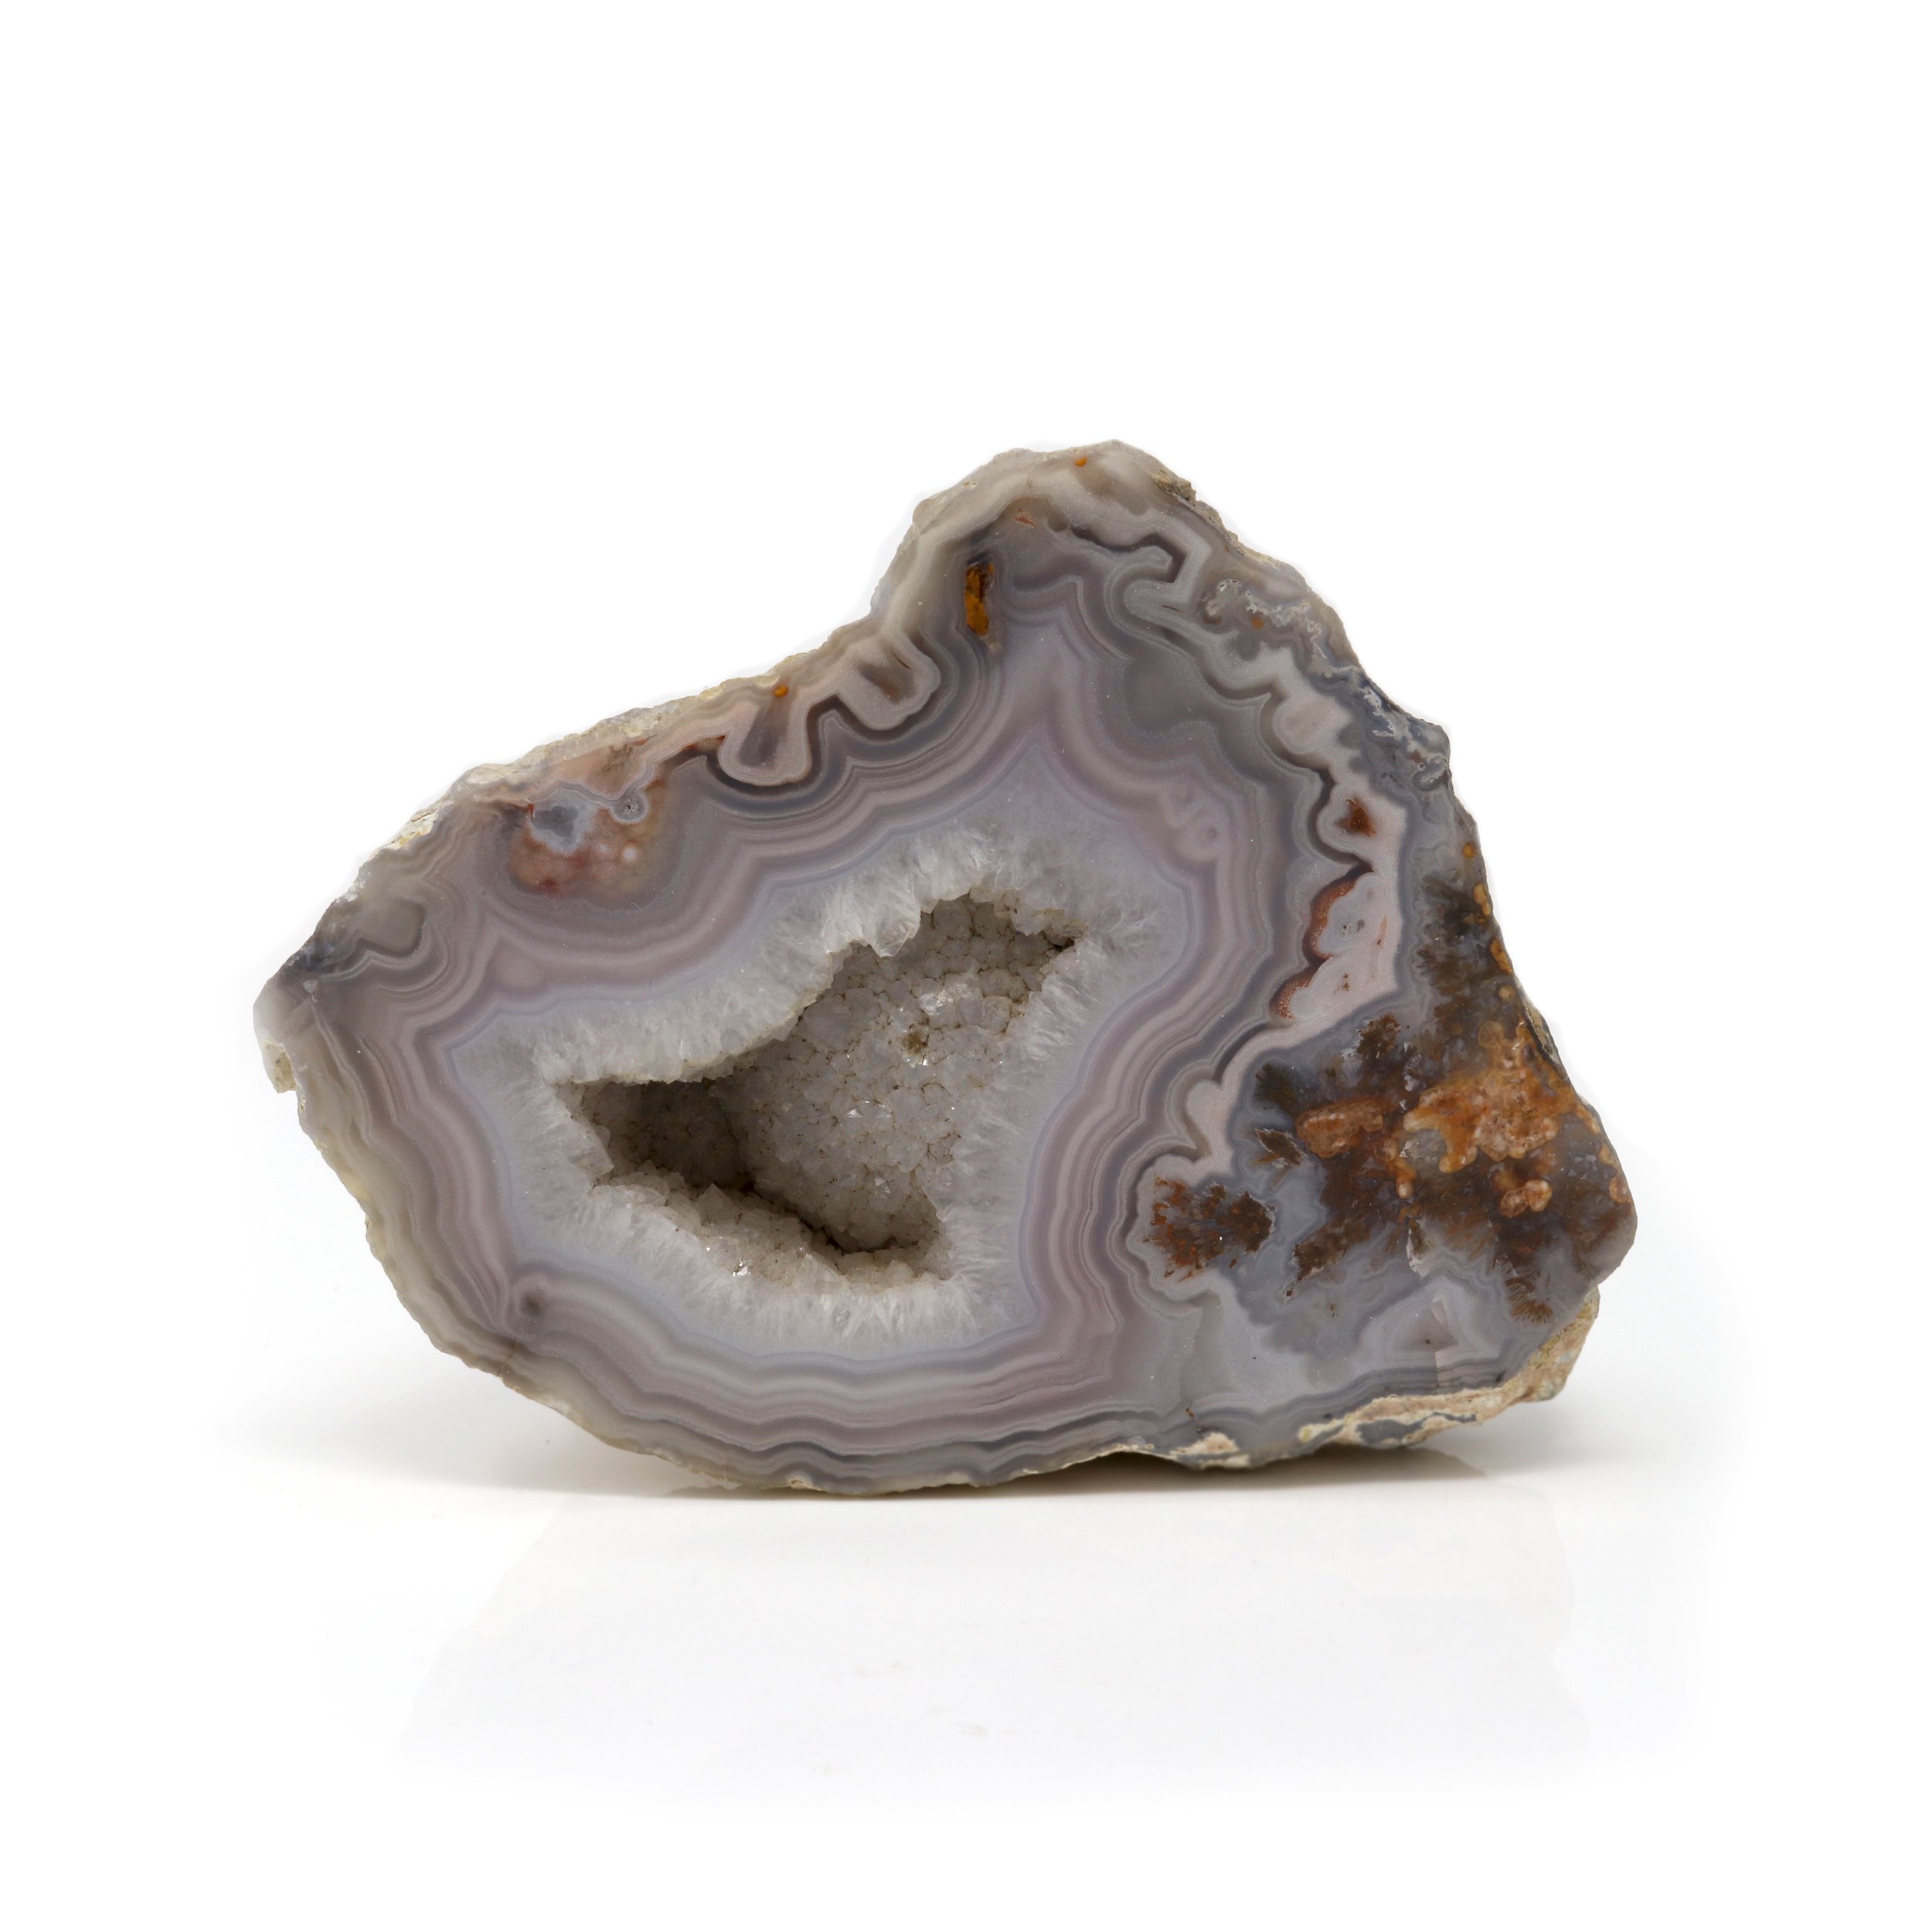 Laguna Lace Agate Geode End Cut - Lavender And White Banding Around A Druze Pocket